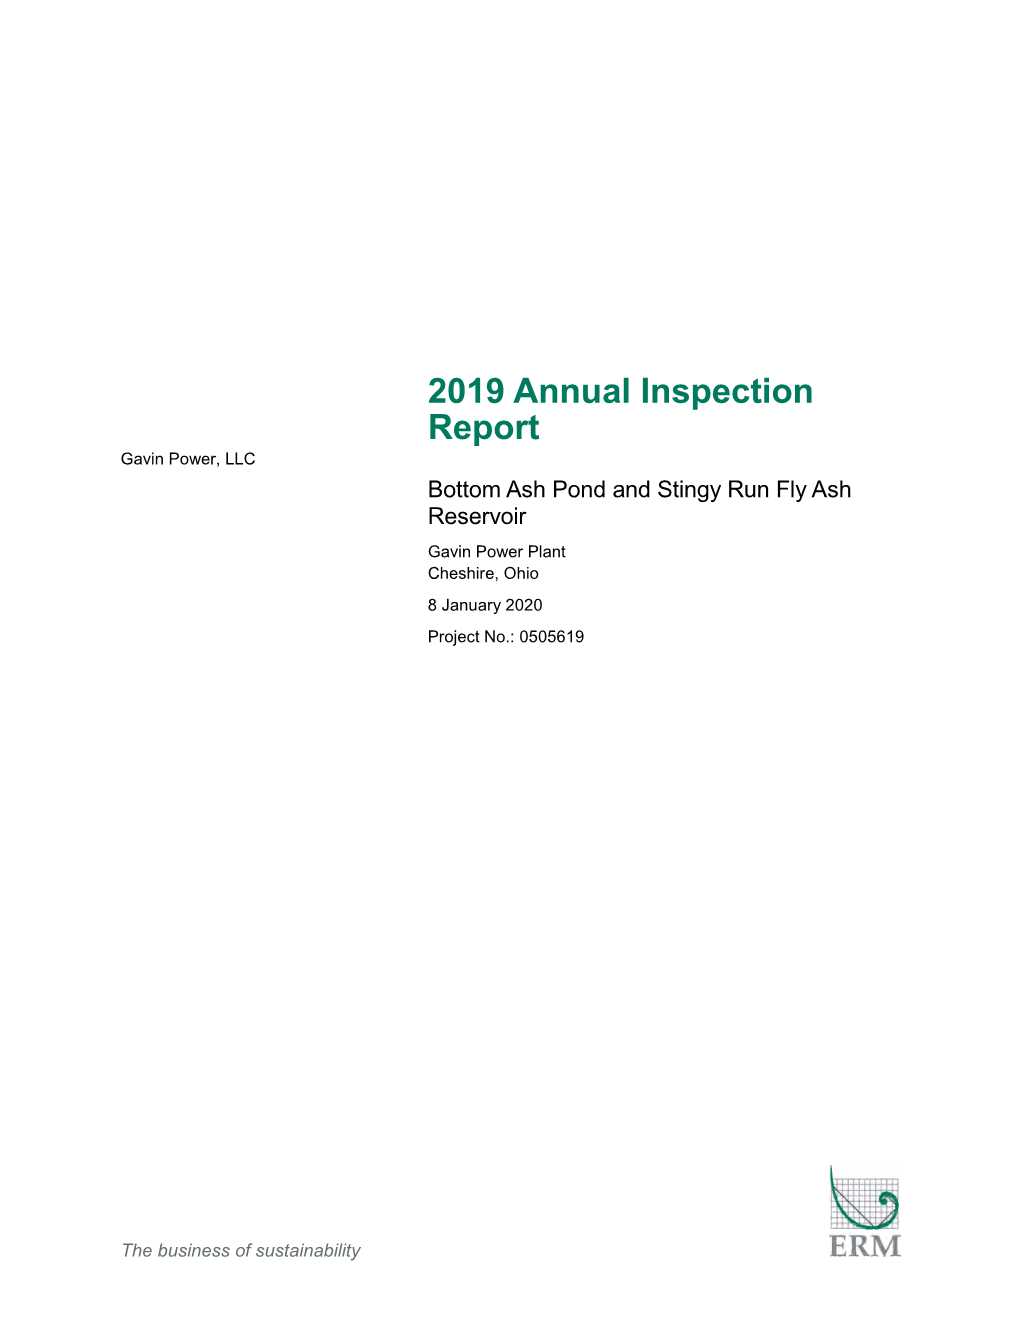 2019 Annual Inspection Report Gavin Power, LLC Bottom Ash Pond and Stingy Run Fly Ash Reservoir Gavin Power Plant Cheshire, Ohio 8 January 2020 Project No.: 0505619